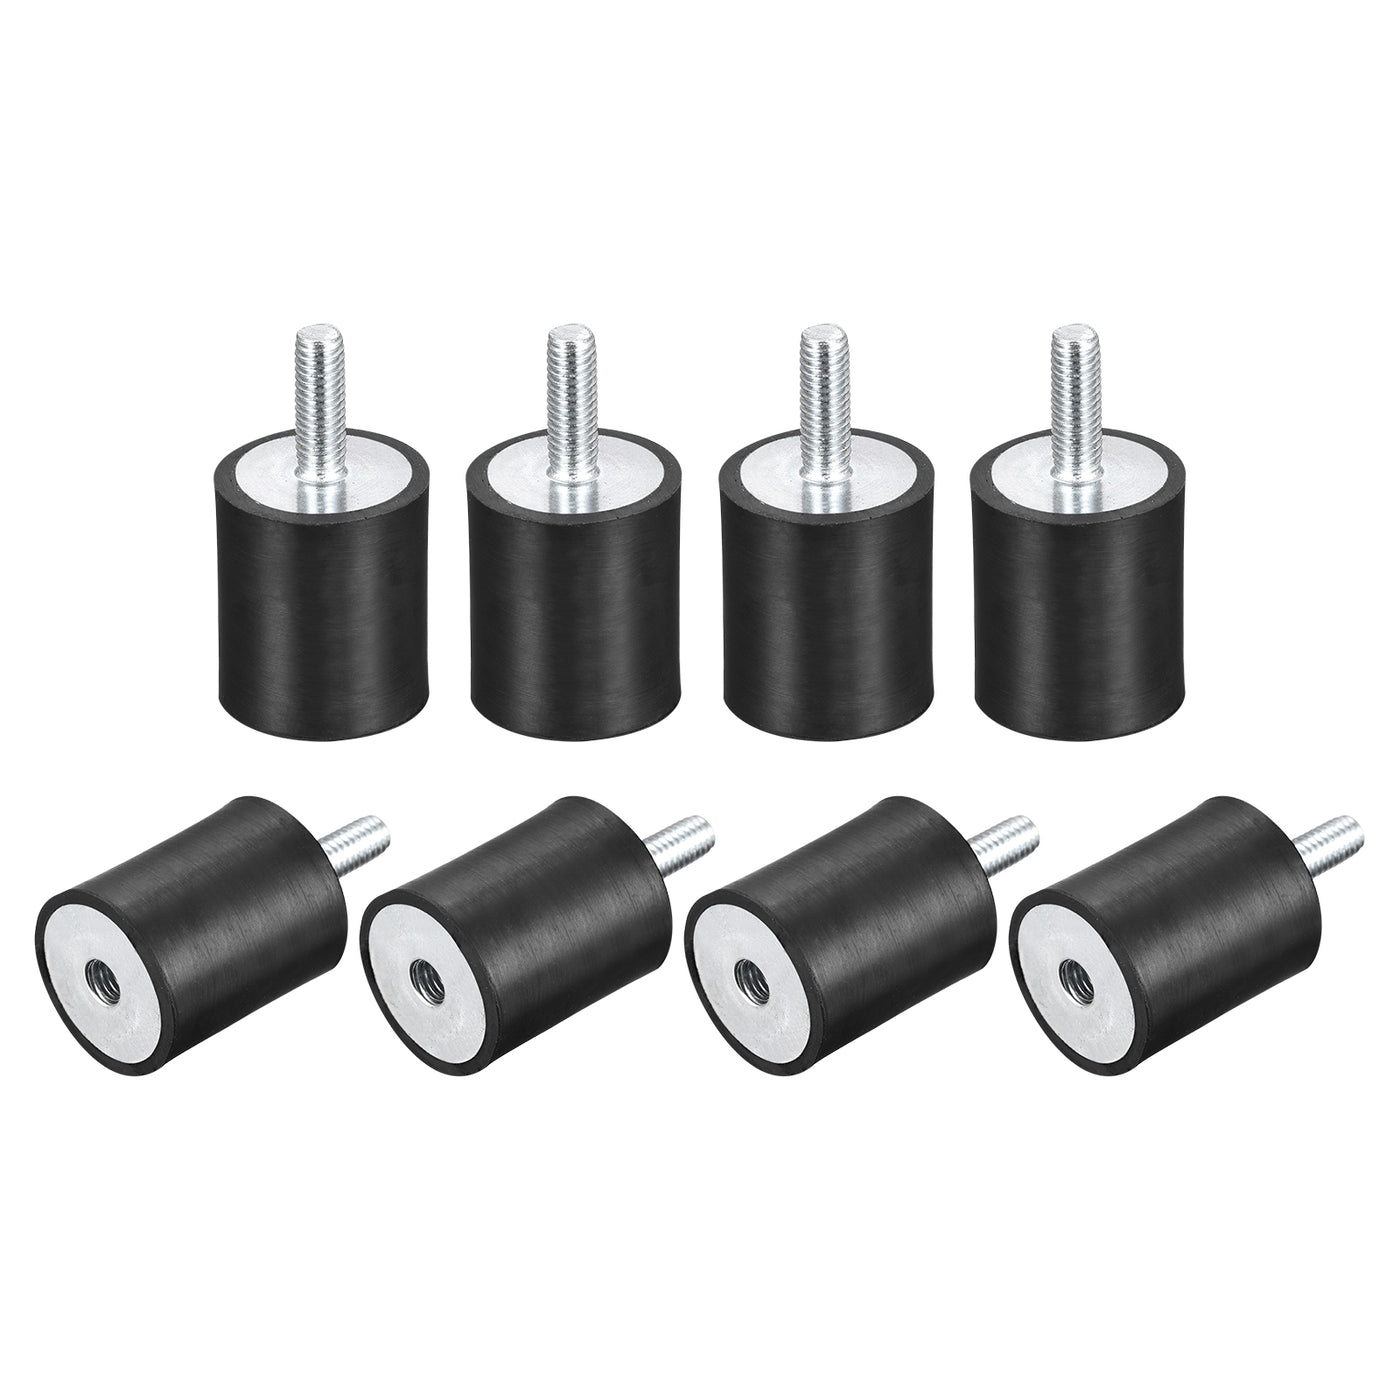 uxcell Uxcell Rubber Mounts 8pcs M6 Male/Female Vibration Isolator Shock Absorber D25mmxH30mm